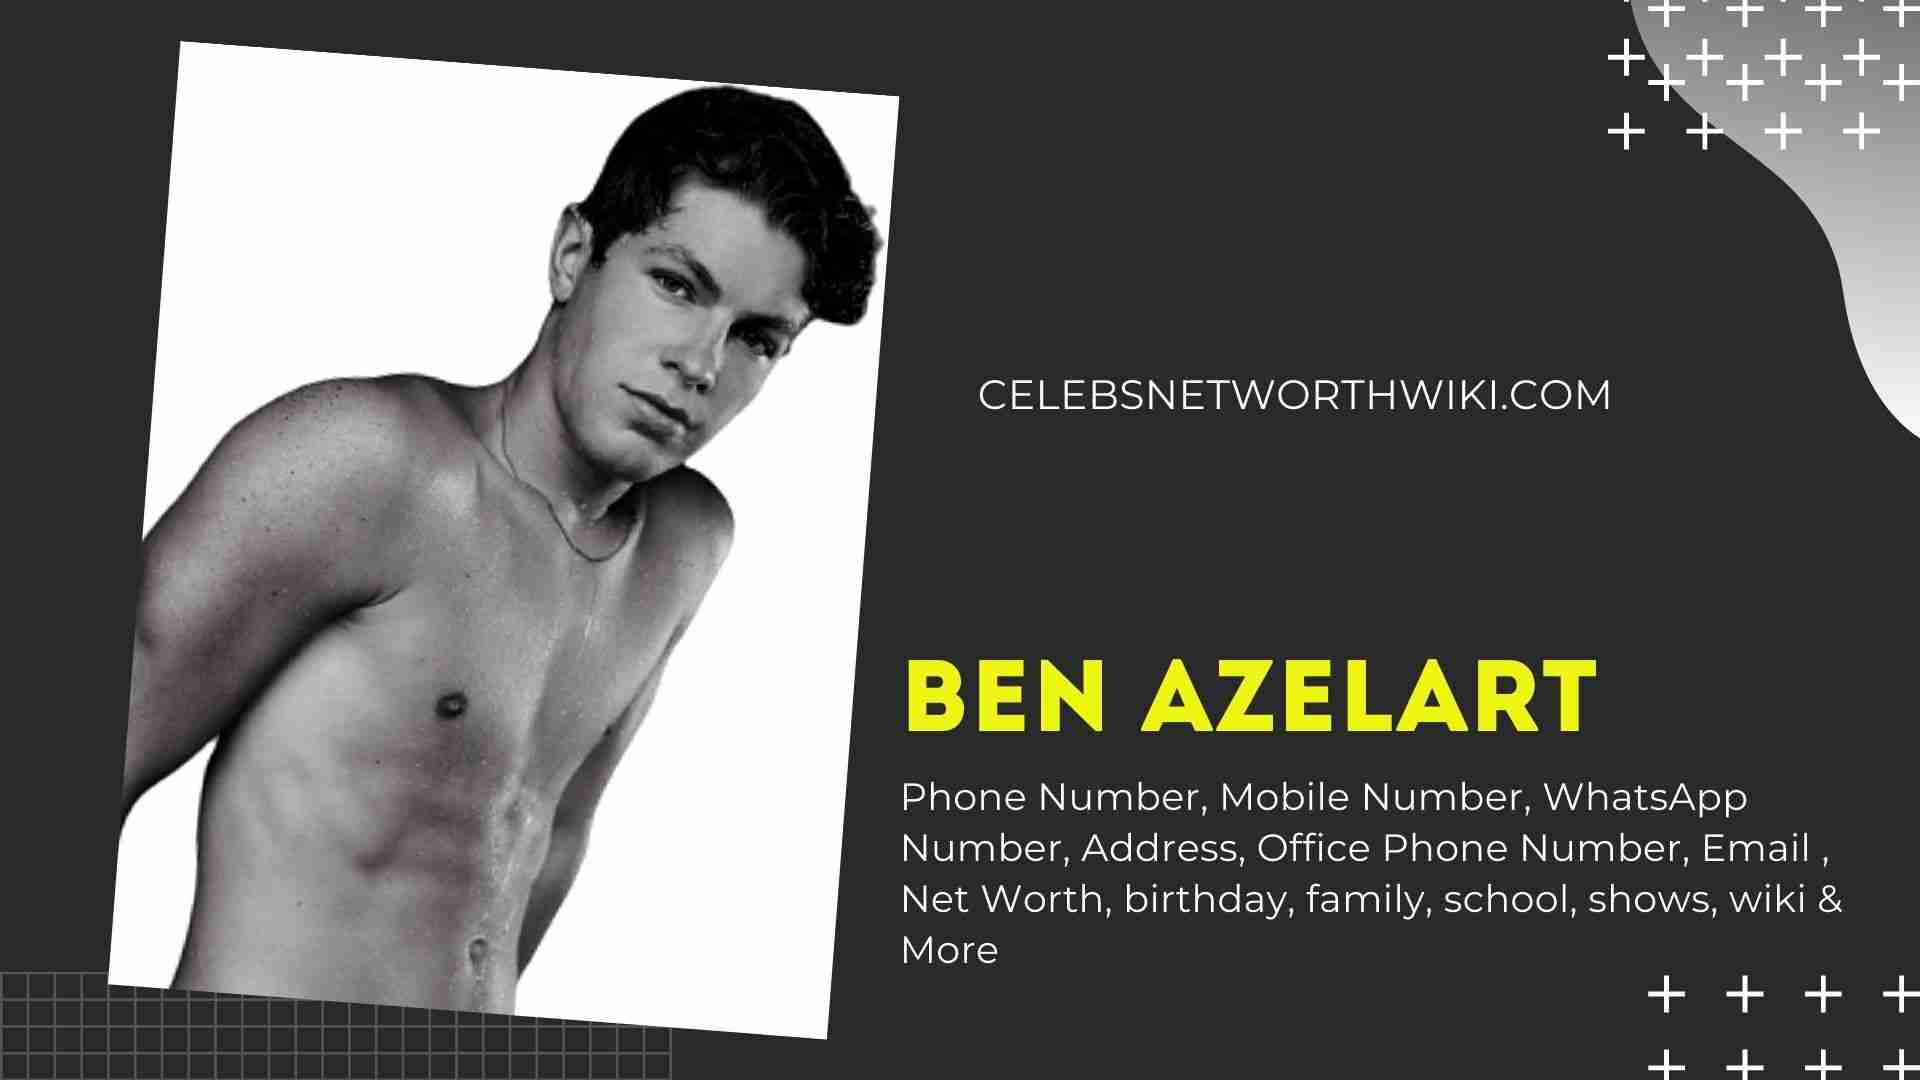 Ben Azelart Phone Number Texting Number Contact Number Mobile Num